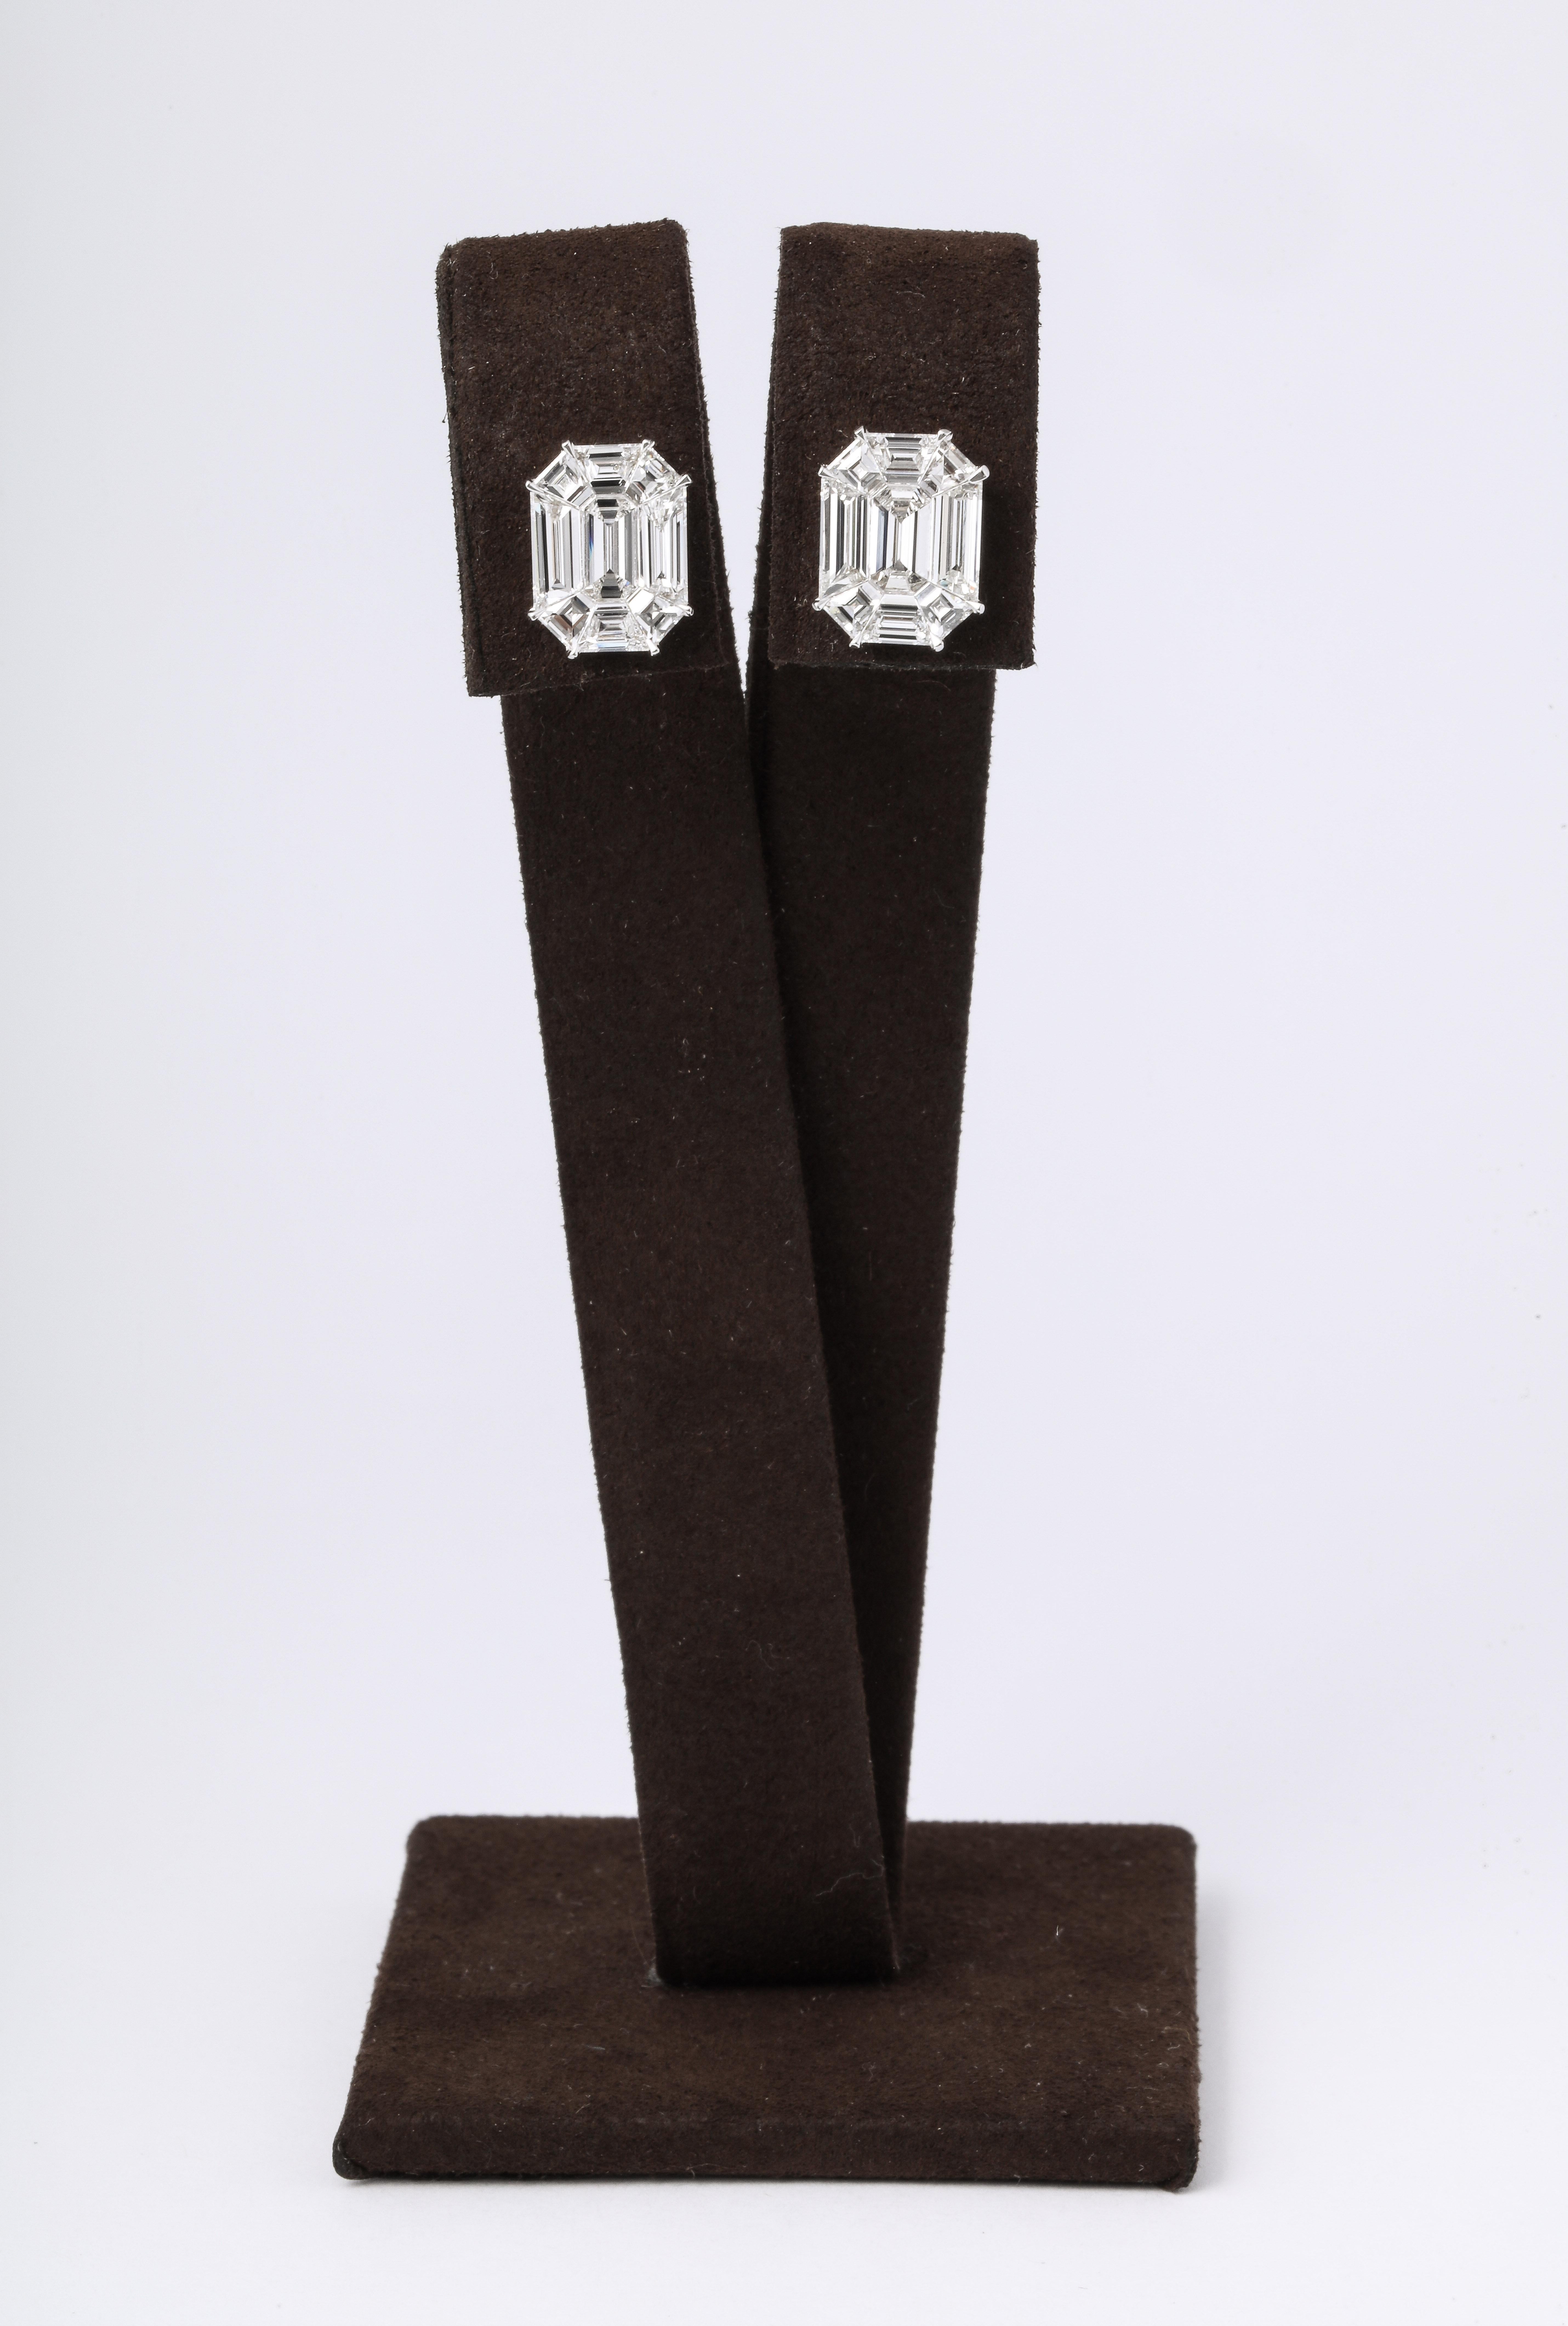 
These earrings give the illusion of 7-8 carat EACH emerald cut studs!

4.65 carats of F VS special cut diamonds, masterly set to look like one emerald cut diamond.

Set in 18k white gold

The earrings measure 12.8 mm x 10 mm approximately. 

A